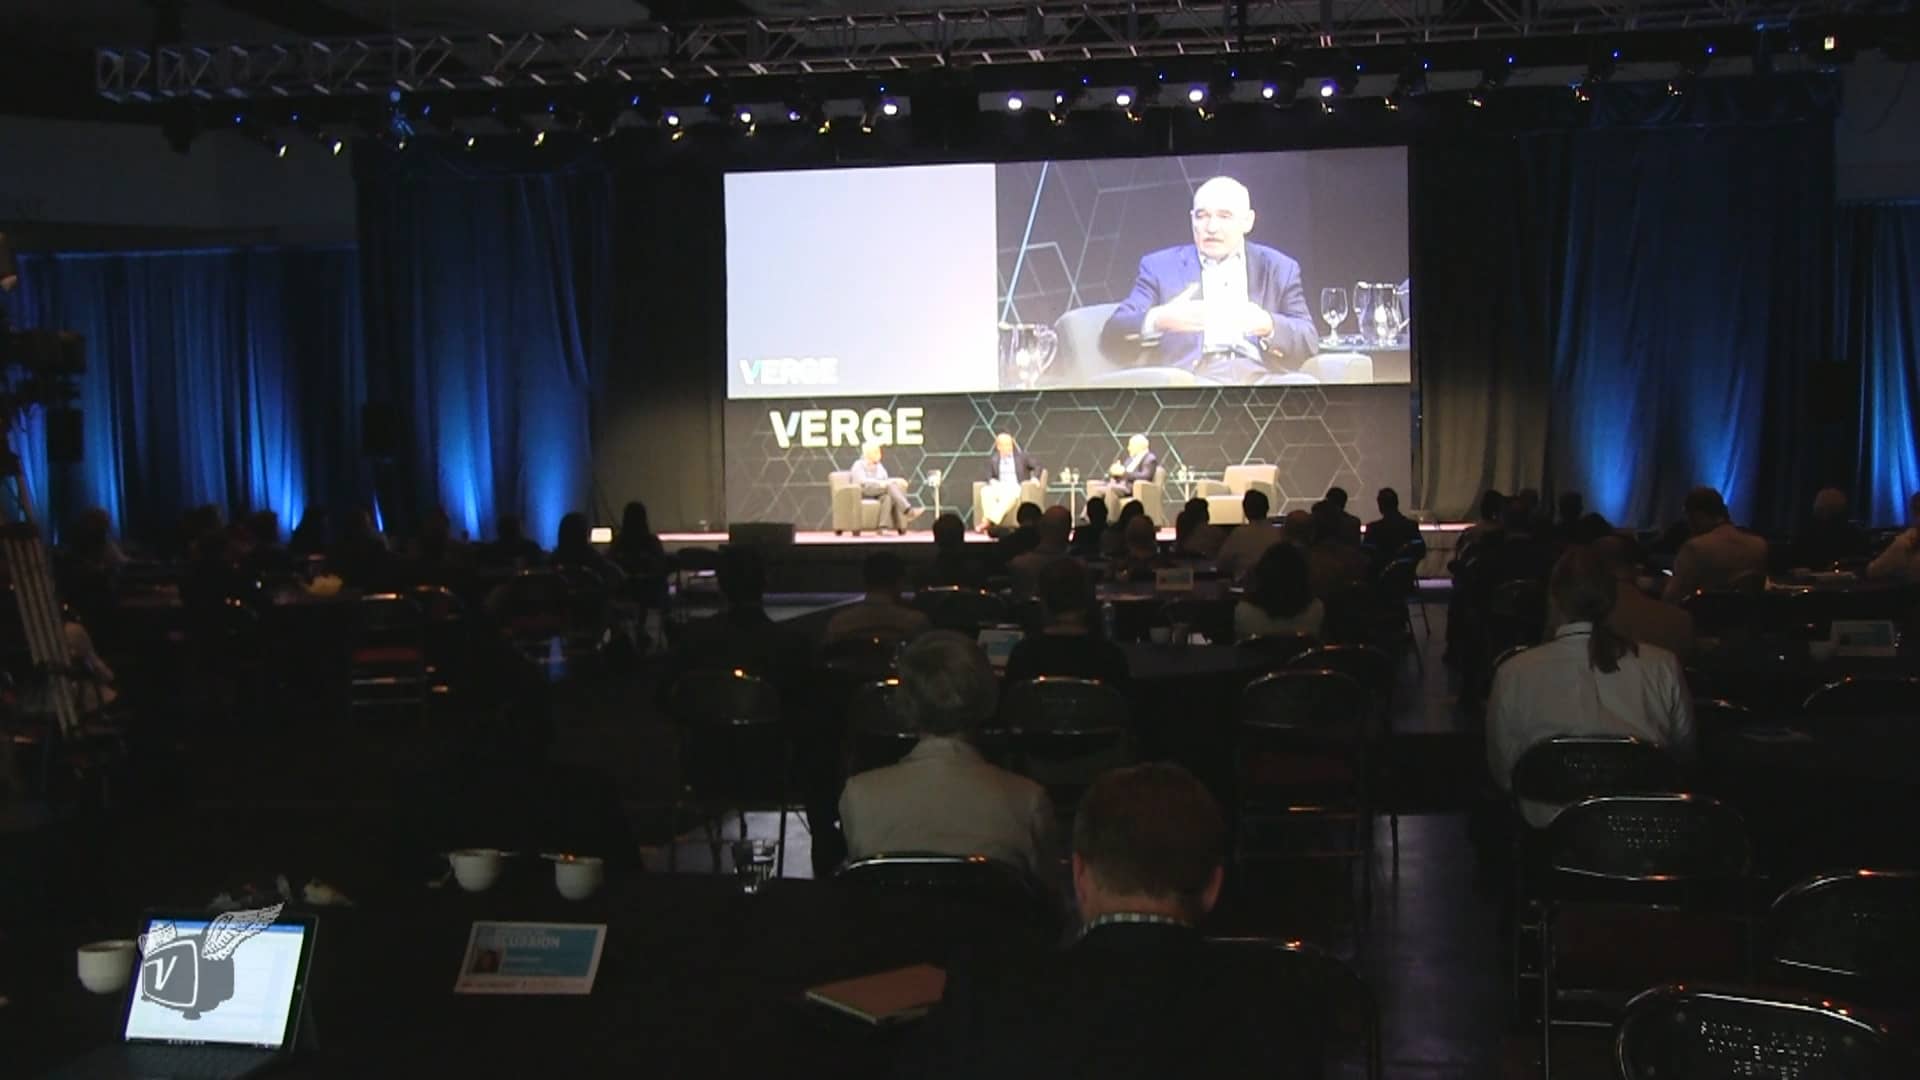 A screenshot of one of the main stage presentations at VERGE 2016.